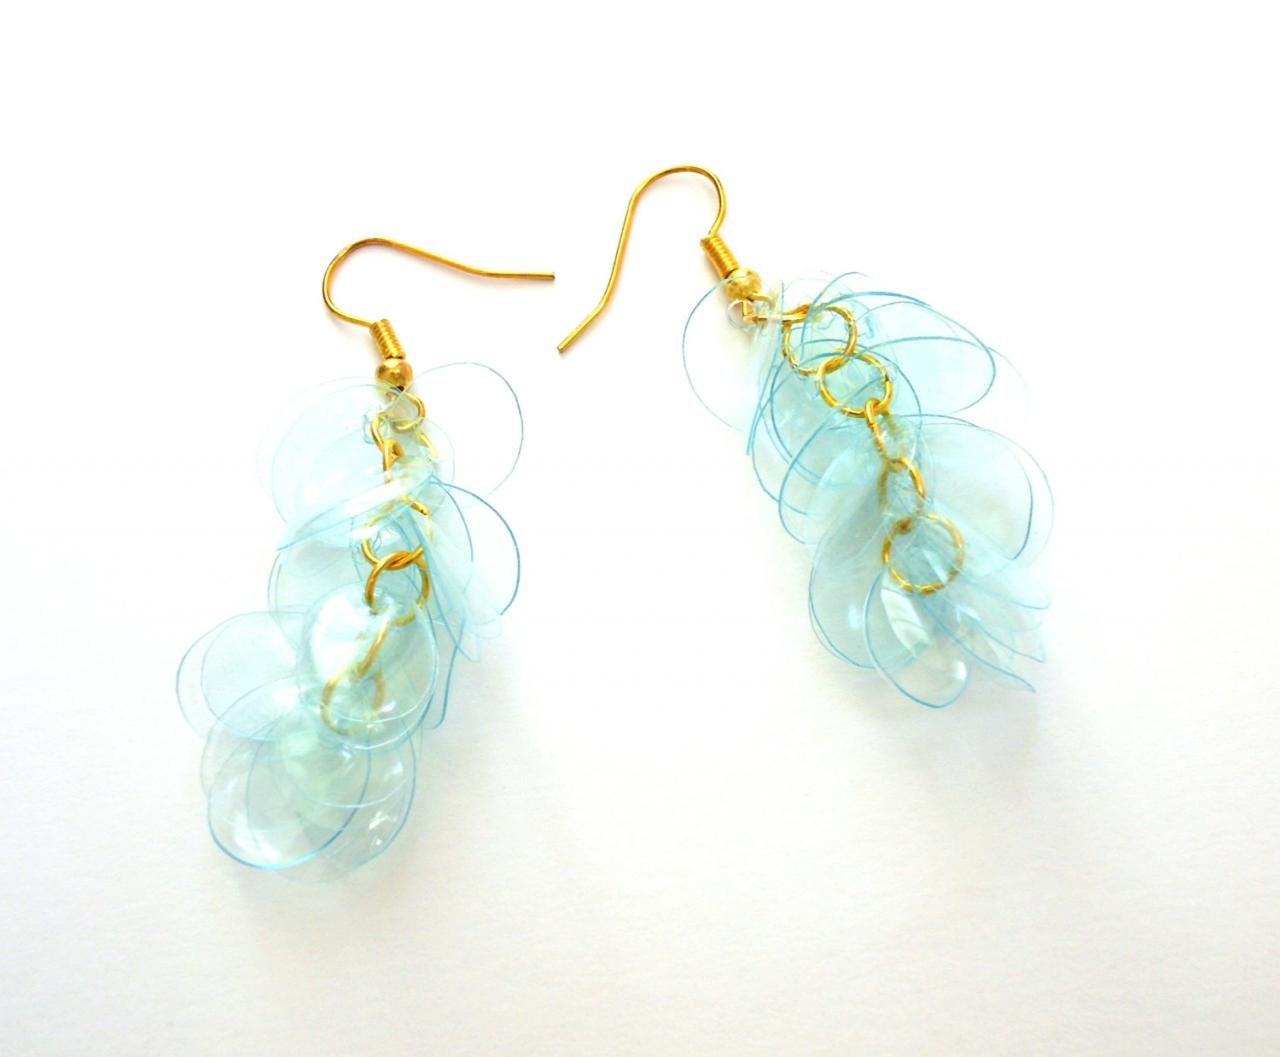 Mint Green And Gold Earrings Made Of Recycled Plastic Bottles, Upcycled Jewelry, Ecofriendly, Repurposed Plastic